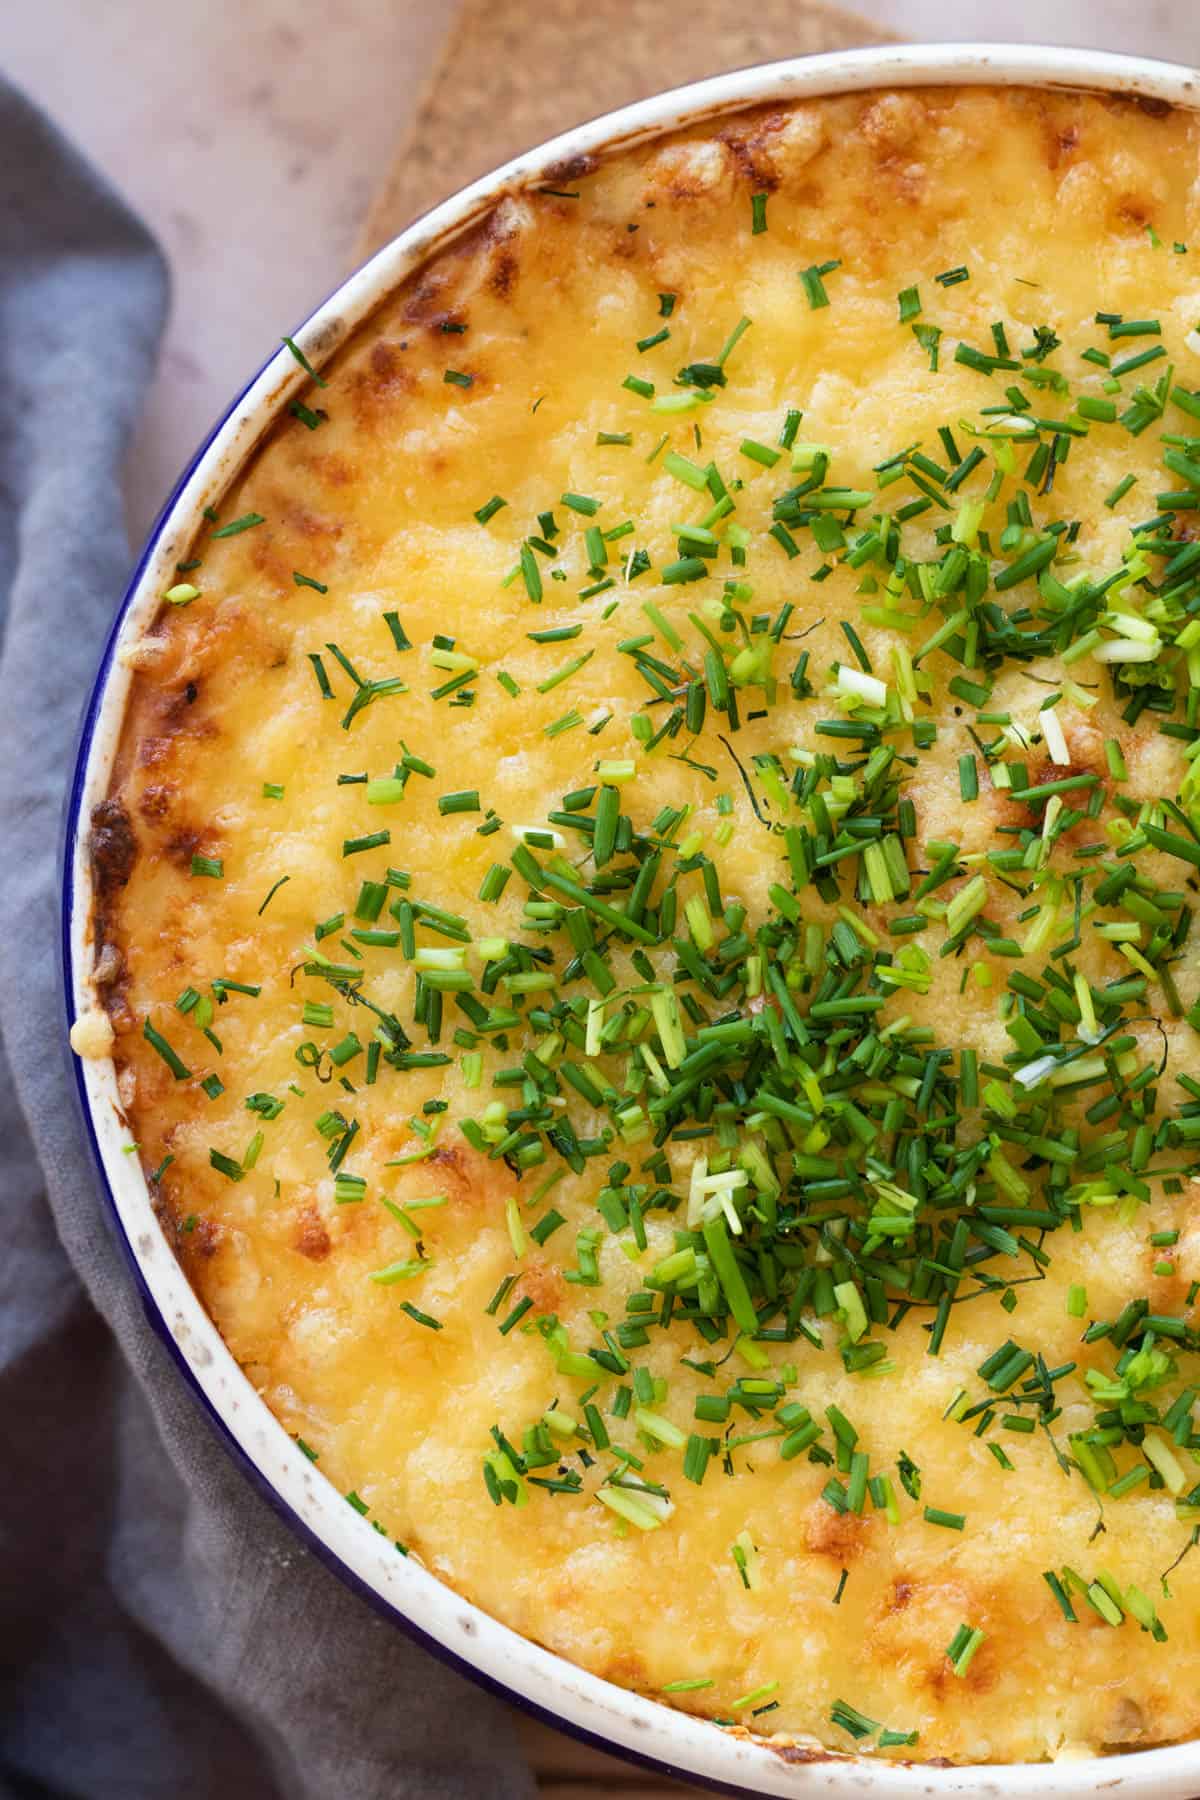 Leftover boiled potato casserole topped with chives.